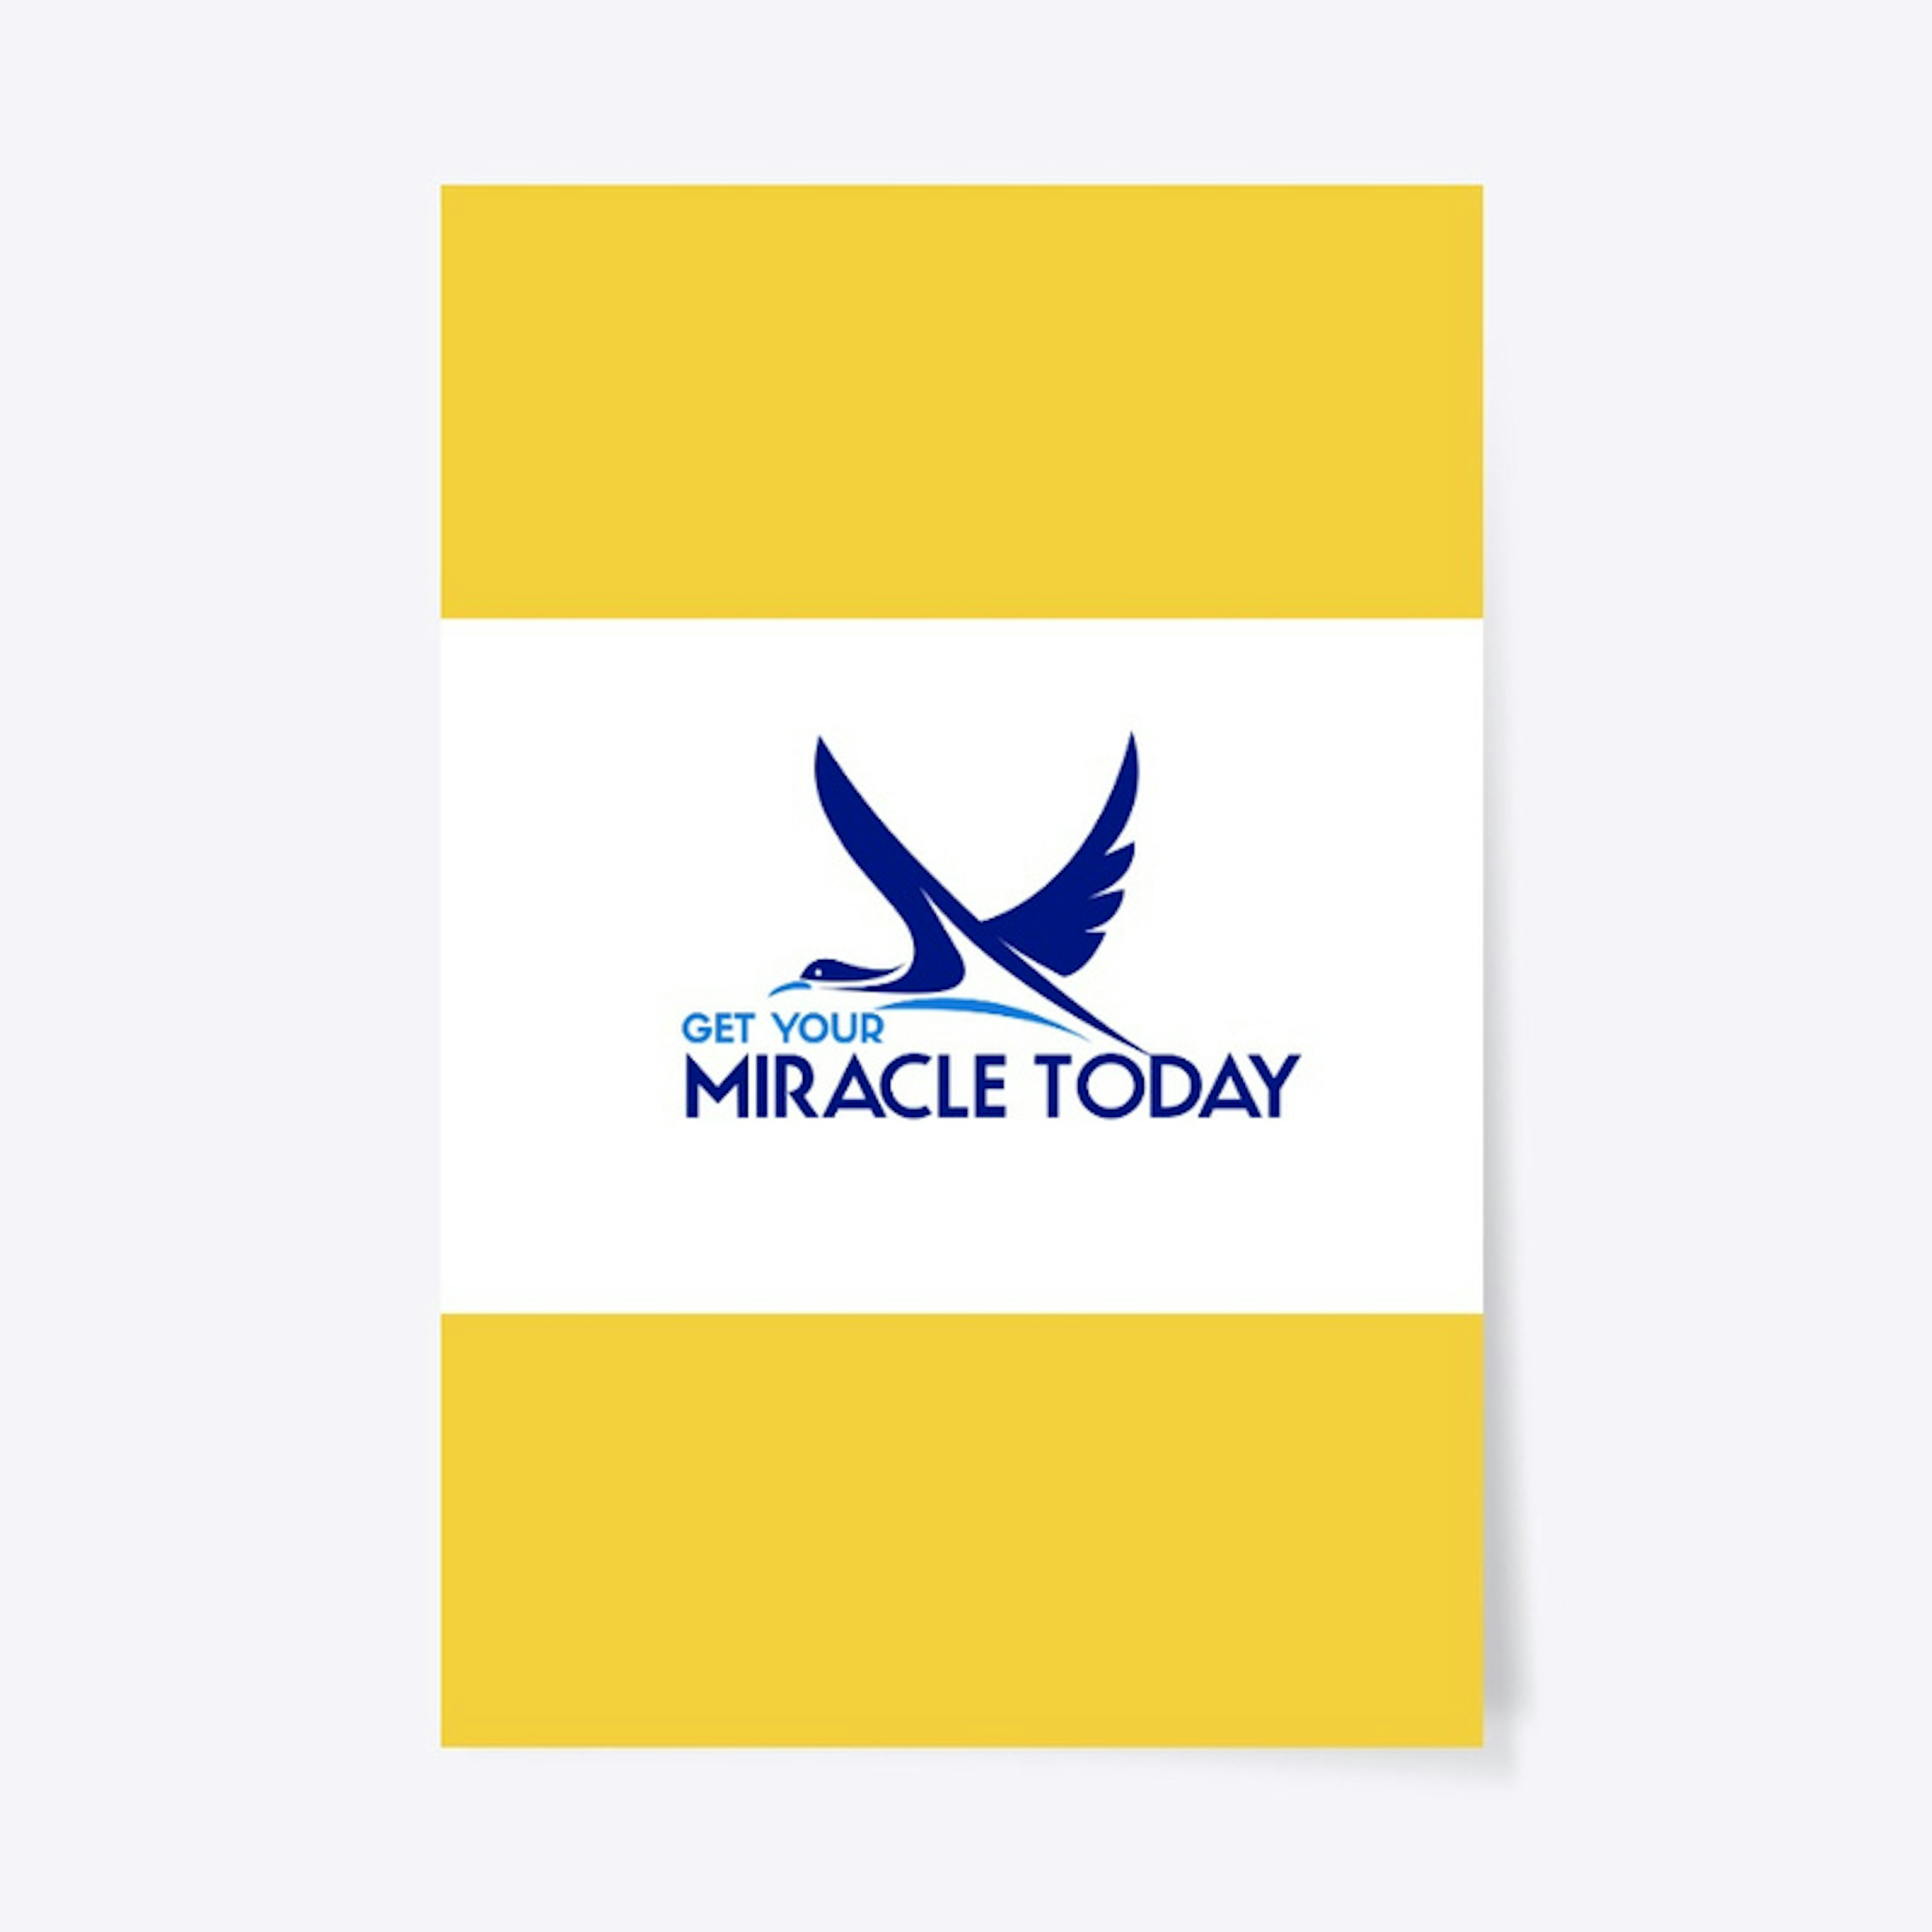 Get Your Miracle Today